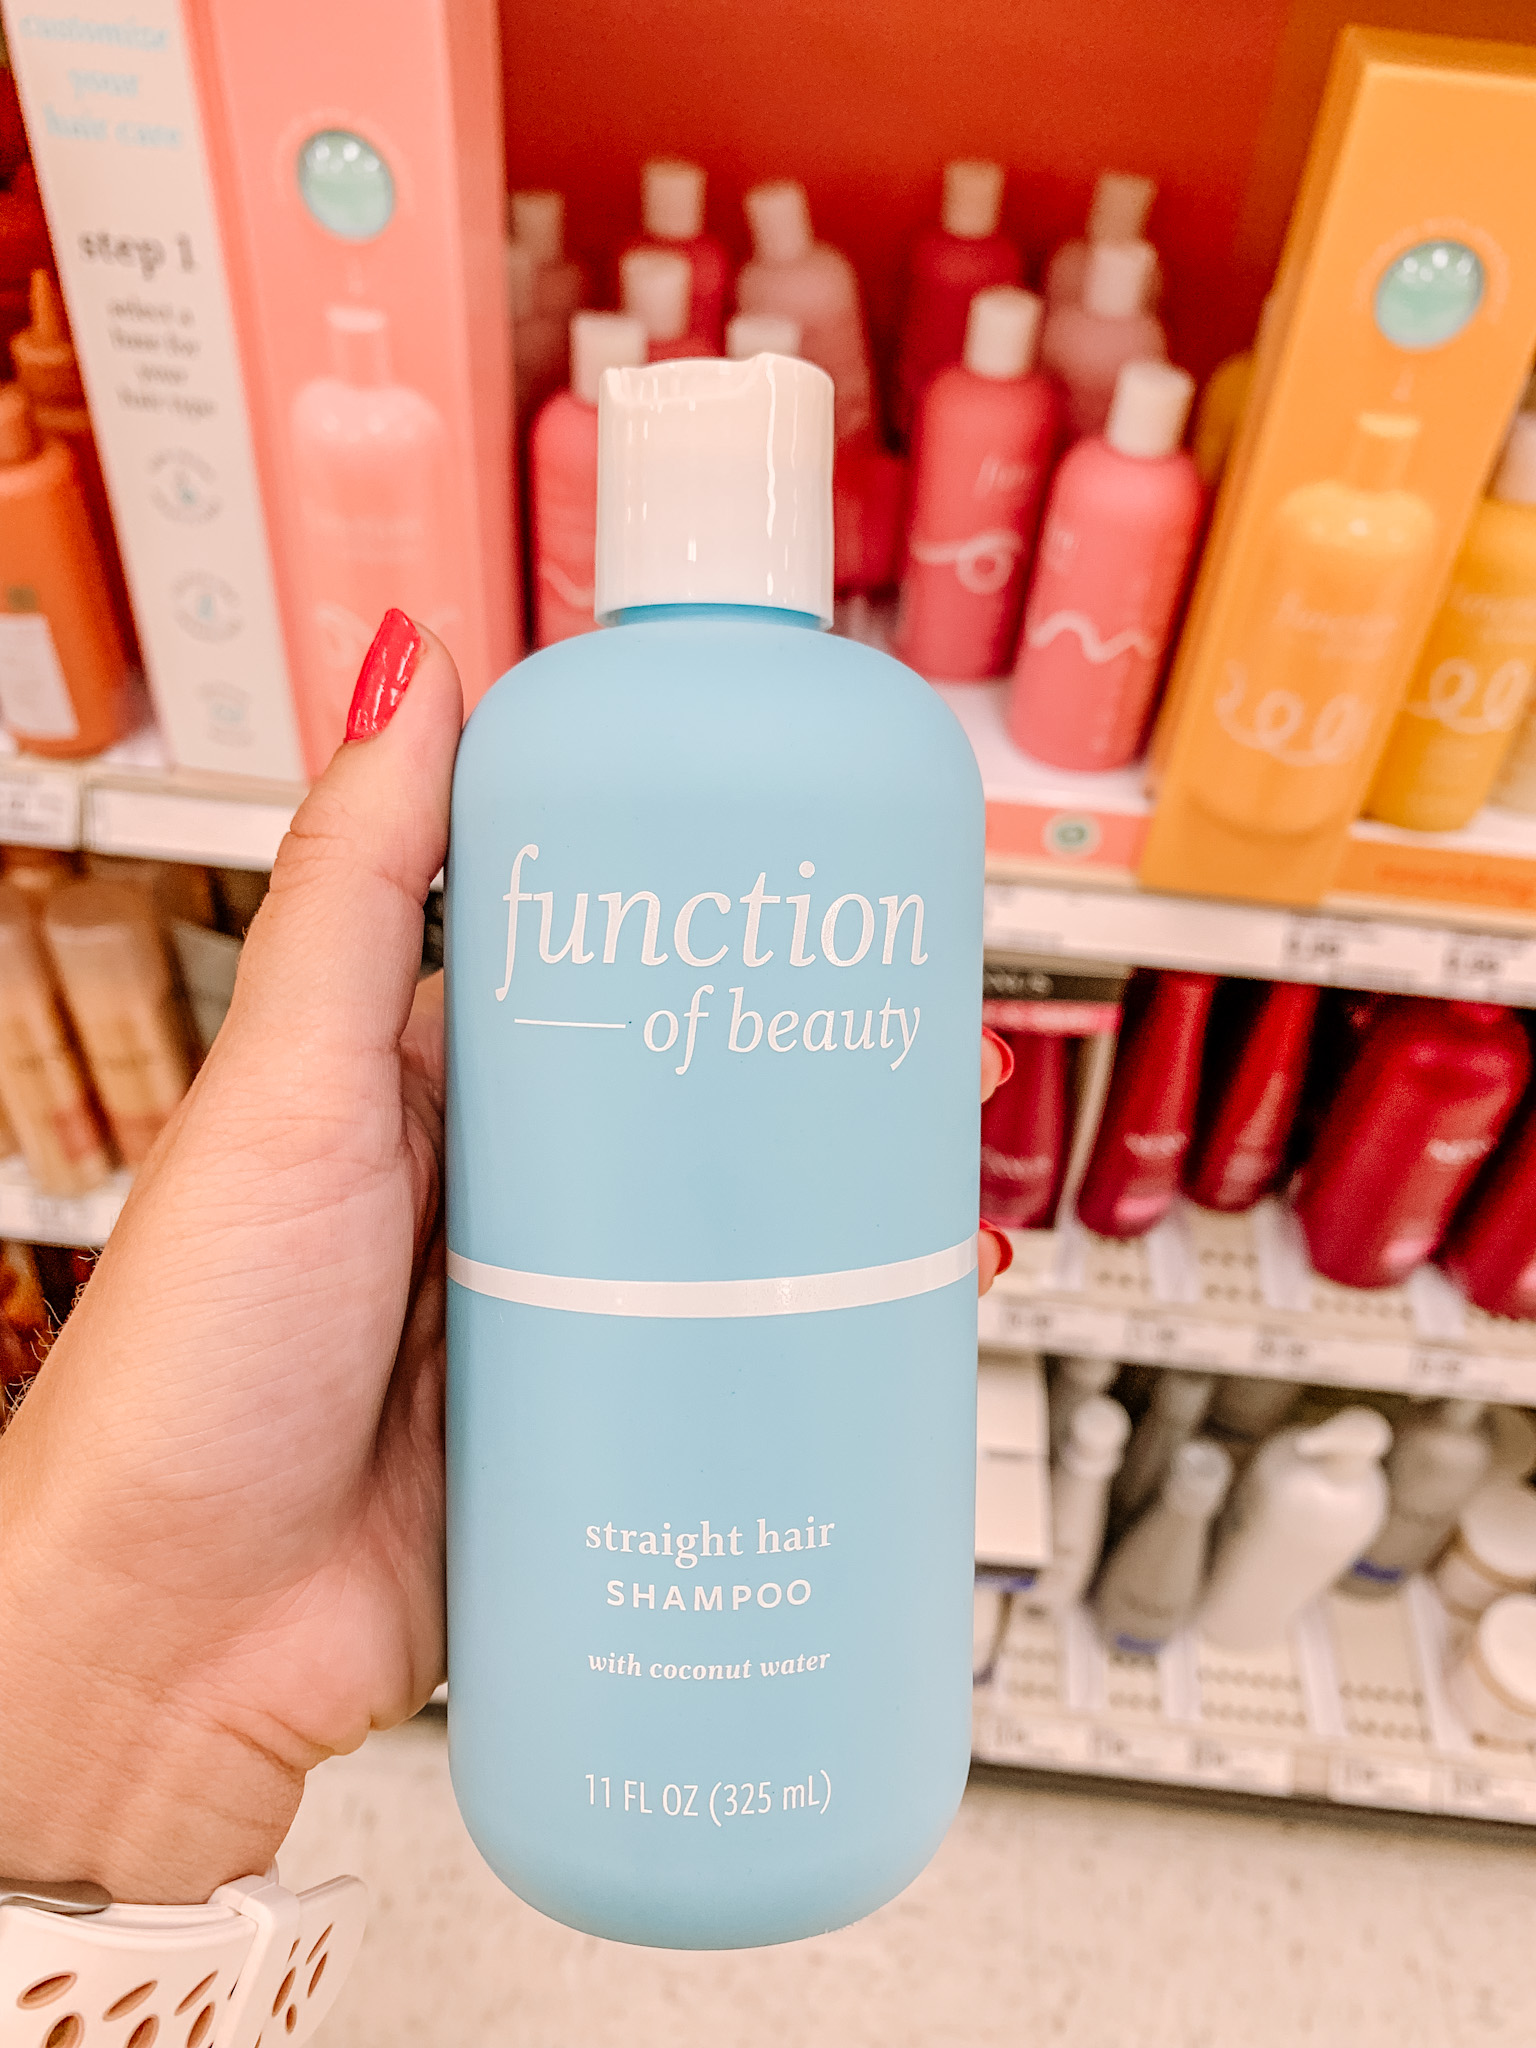 10 Must Try Target Hair Products Under $10 - Sarah Scoop